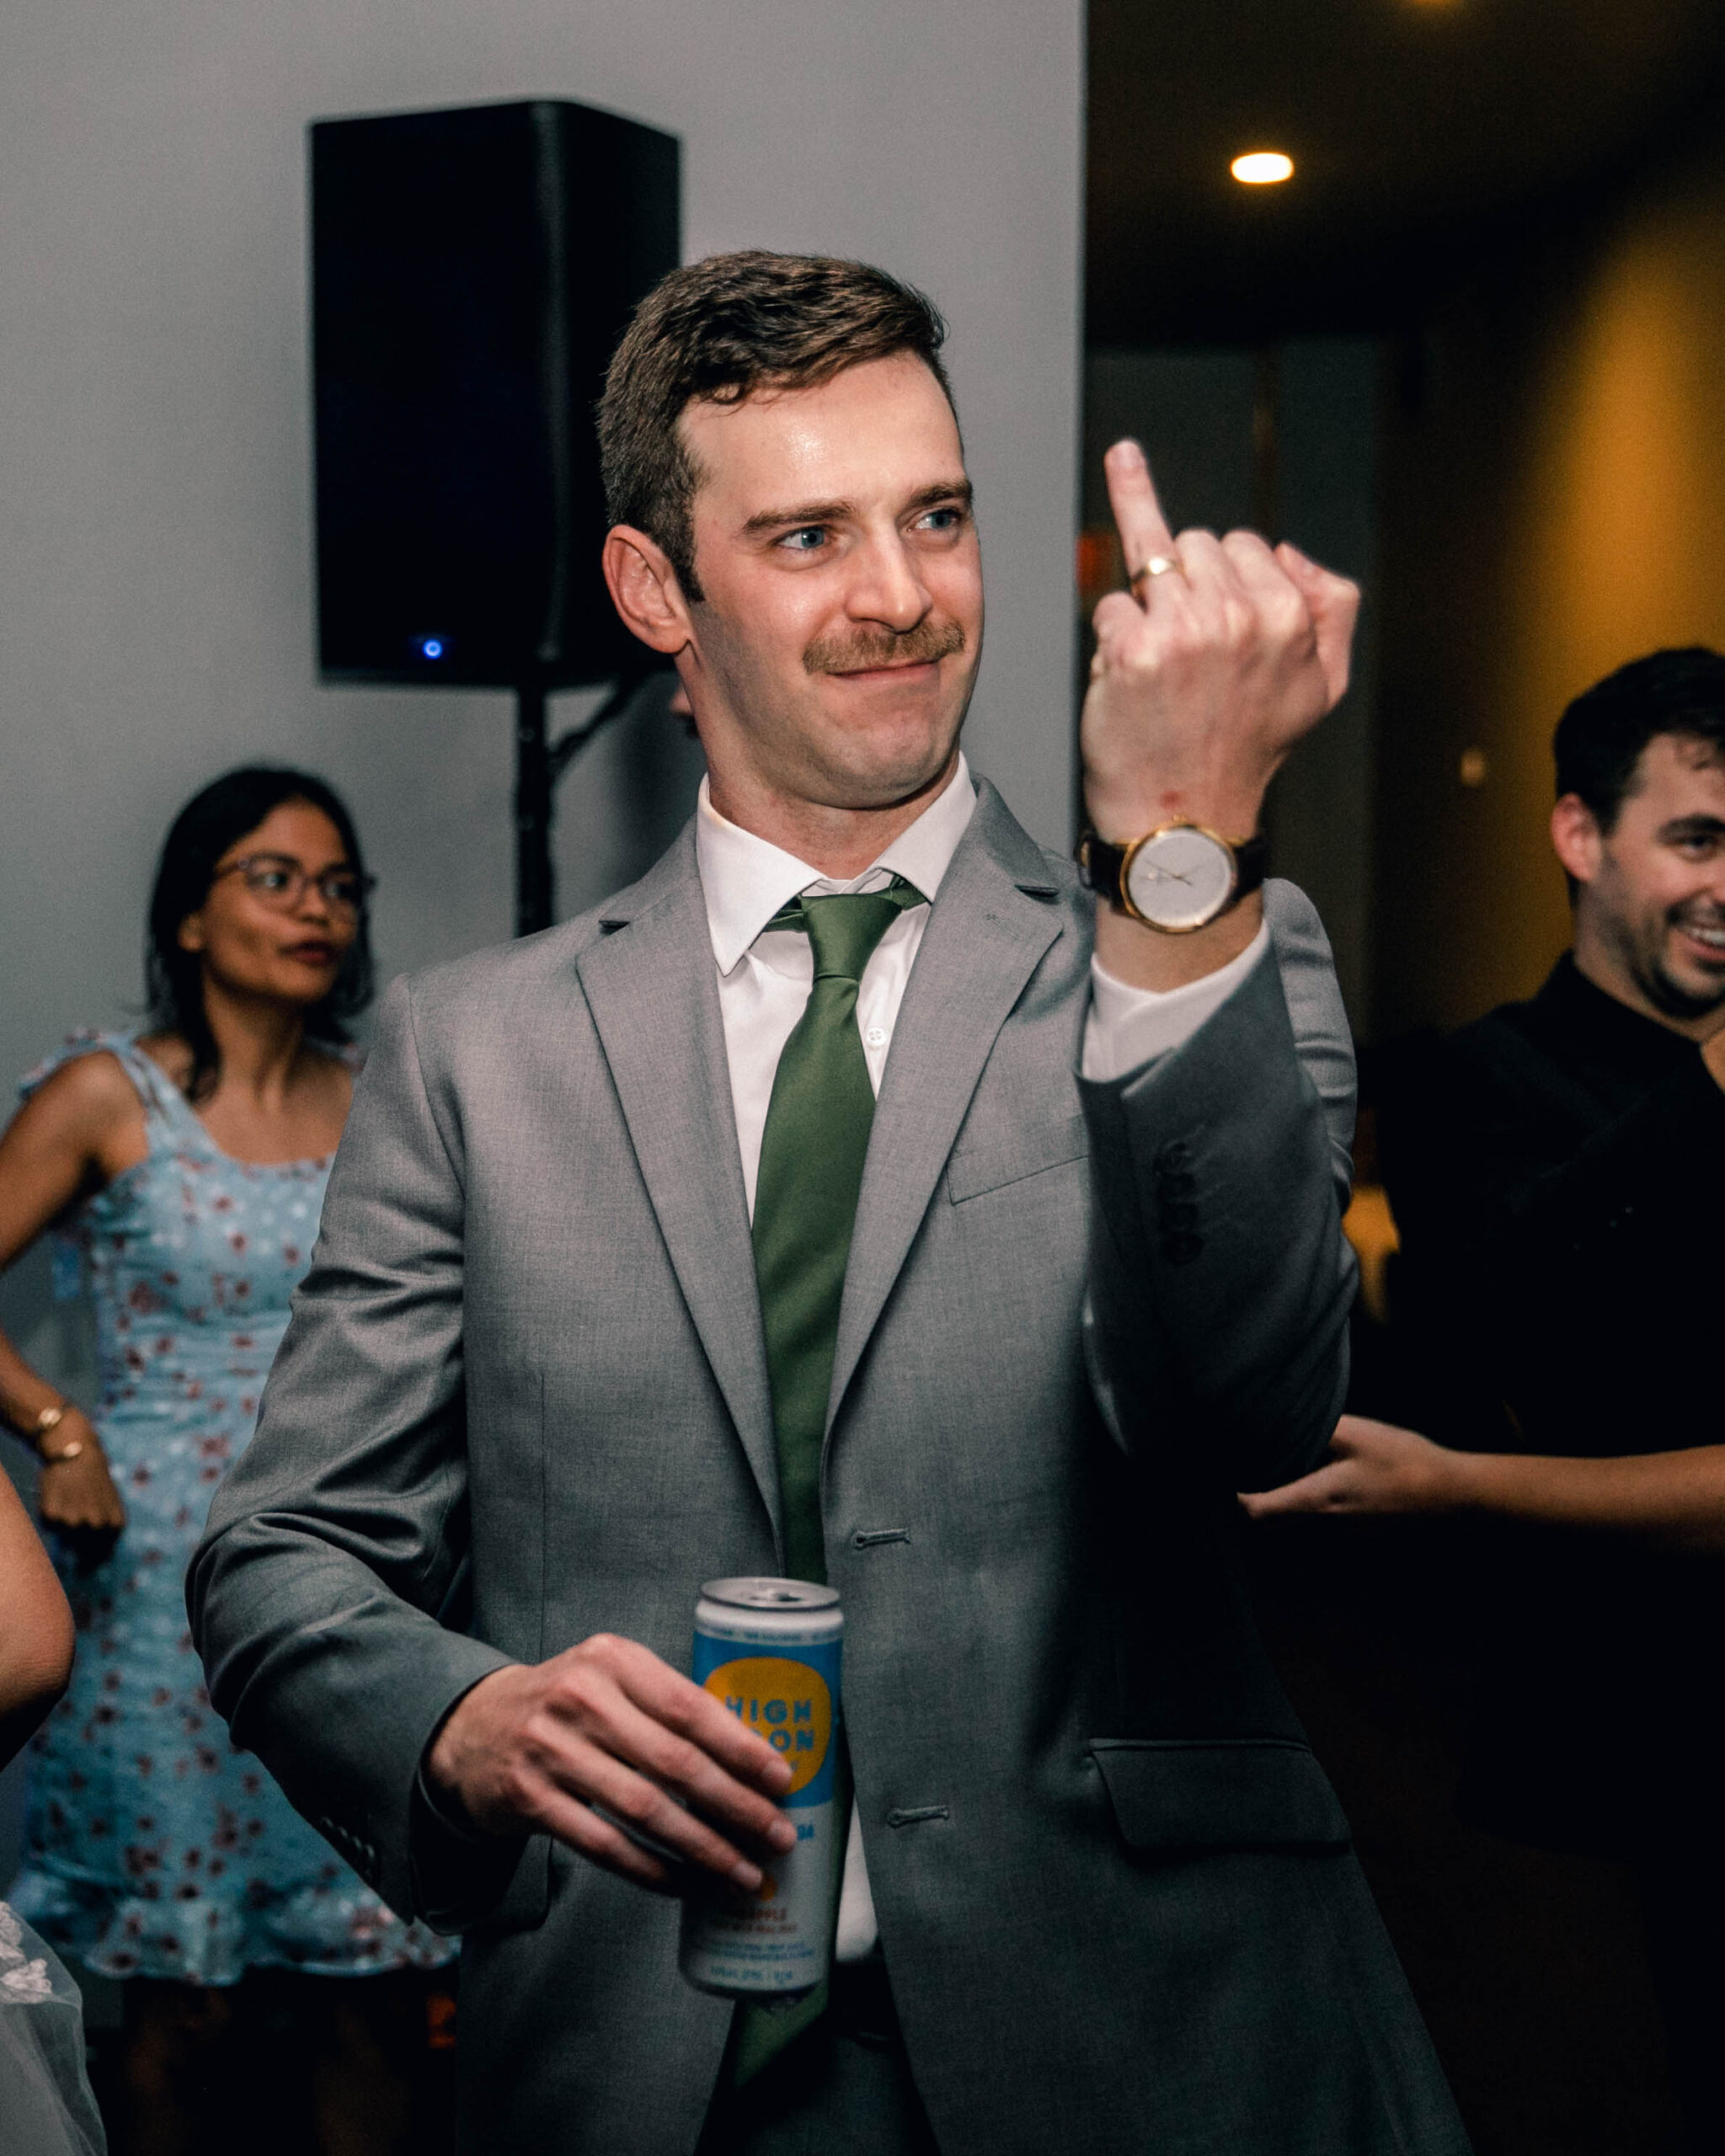 Wedding Reception Documentary Photography - Groom showing off his new wedding ring